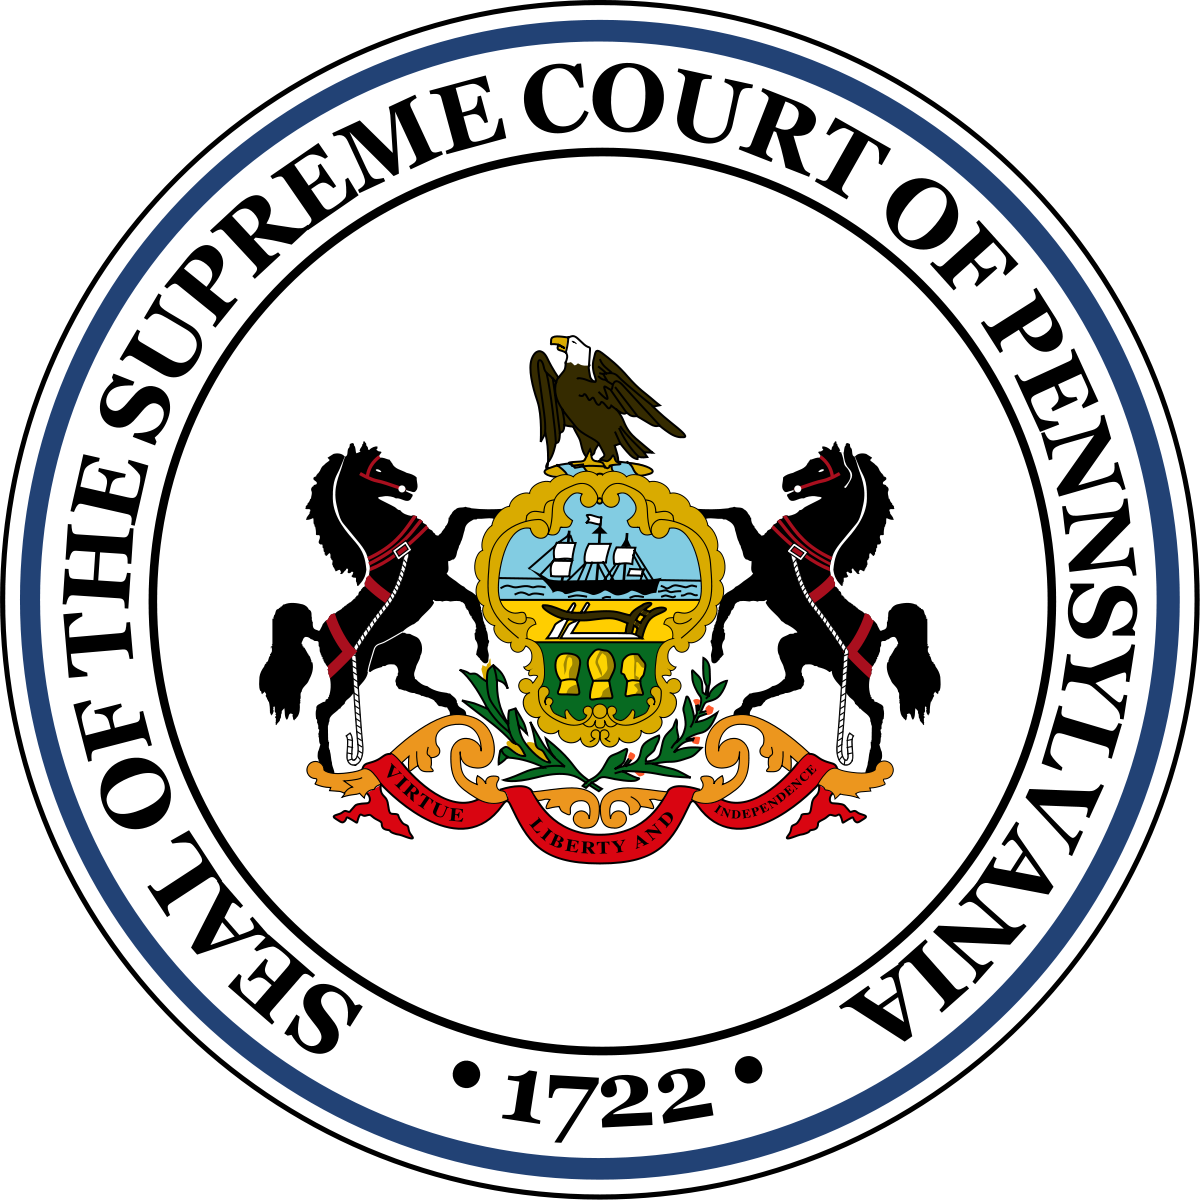 PA Supreme Court has been rocked by scandals. Report highlights judicial discipline reforms 